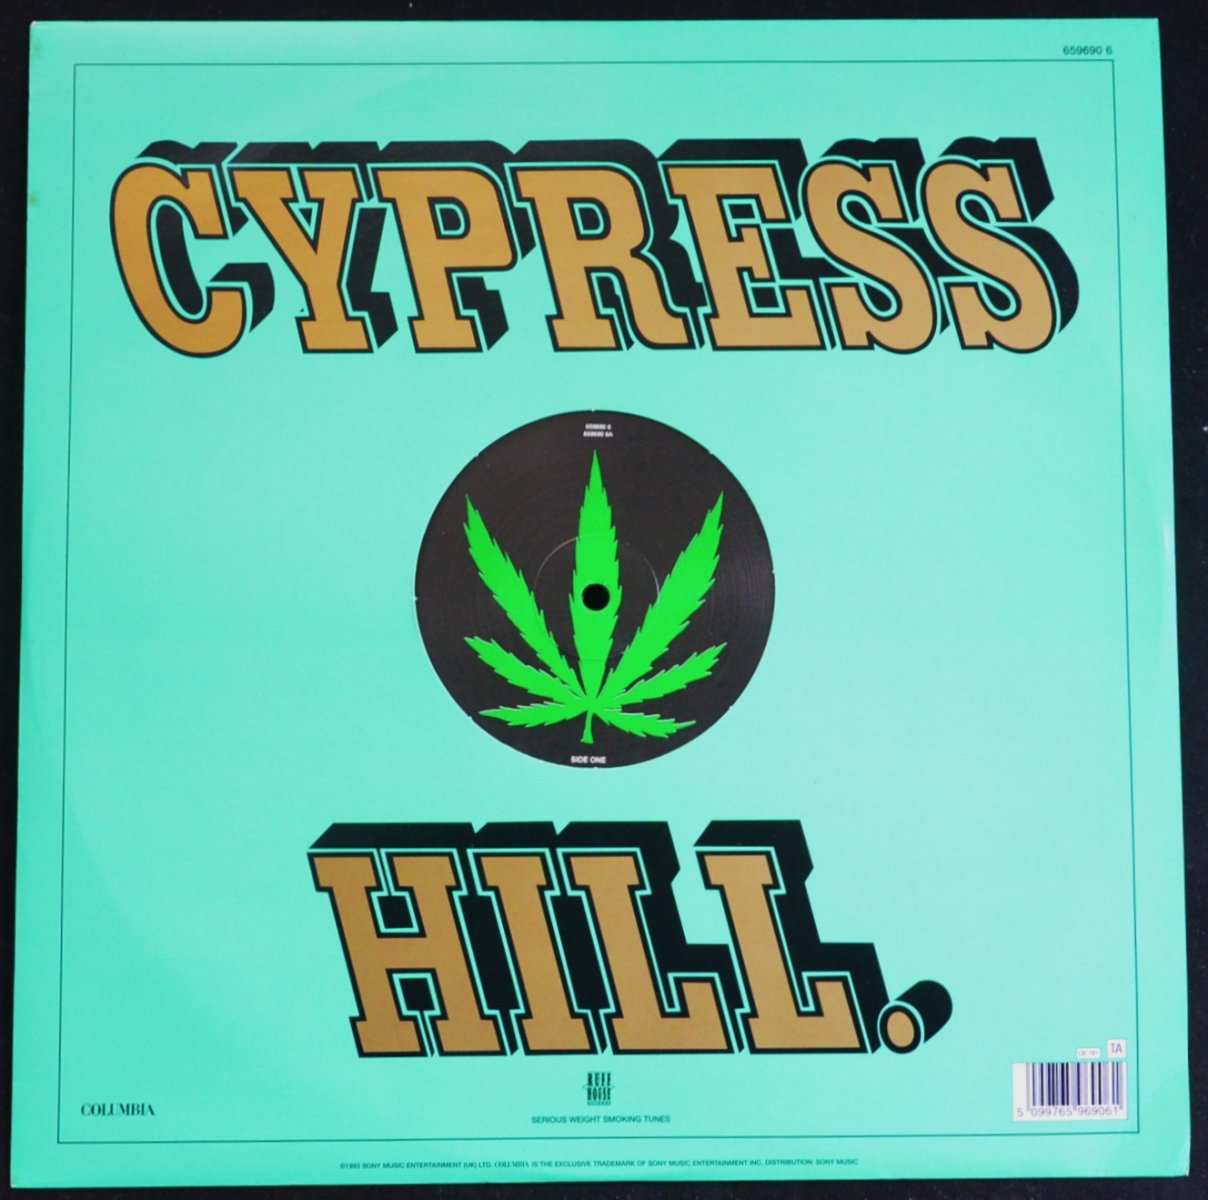 CYPRESS HILL / I AIN'T GOIN' OUT LIKE THAT / WHEN THE SH-- GOES DOWN (DIAMOND D REMIX) (12